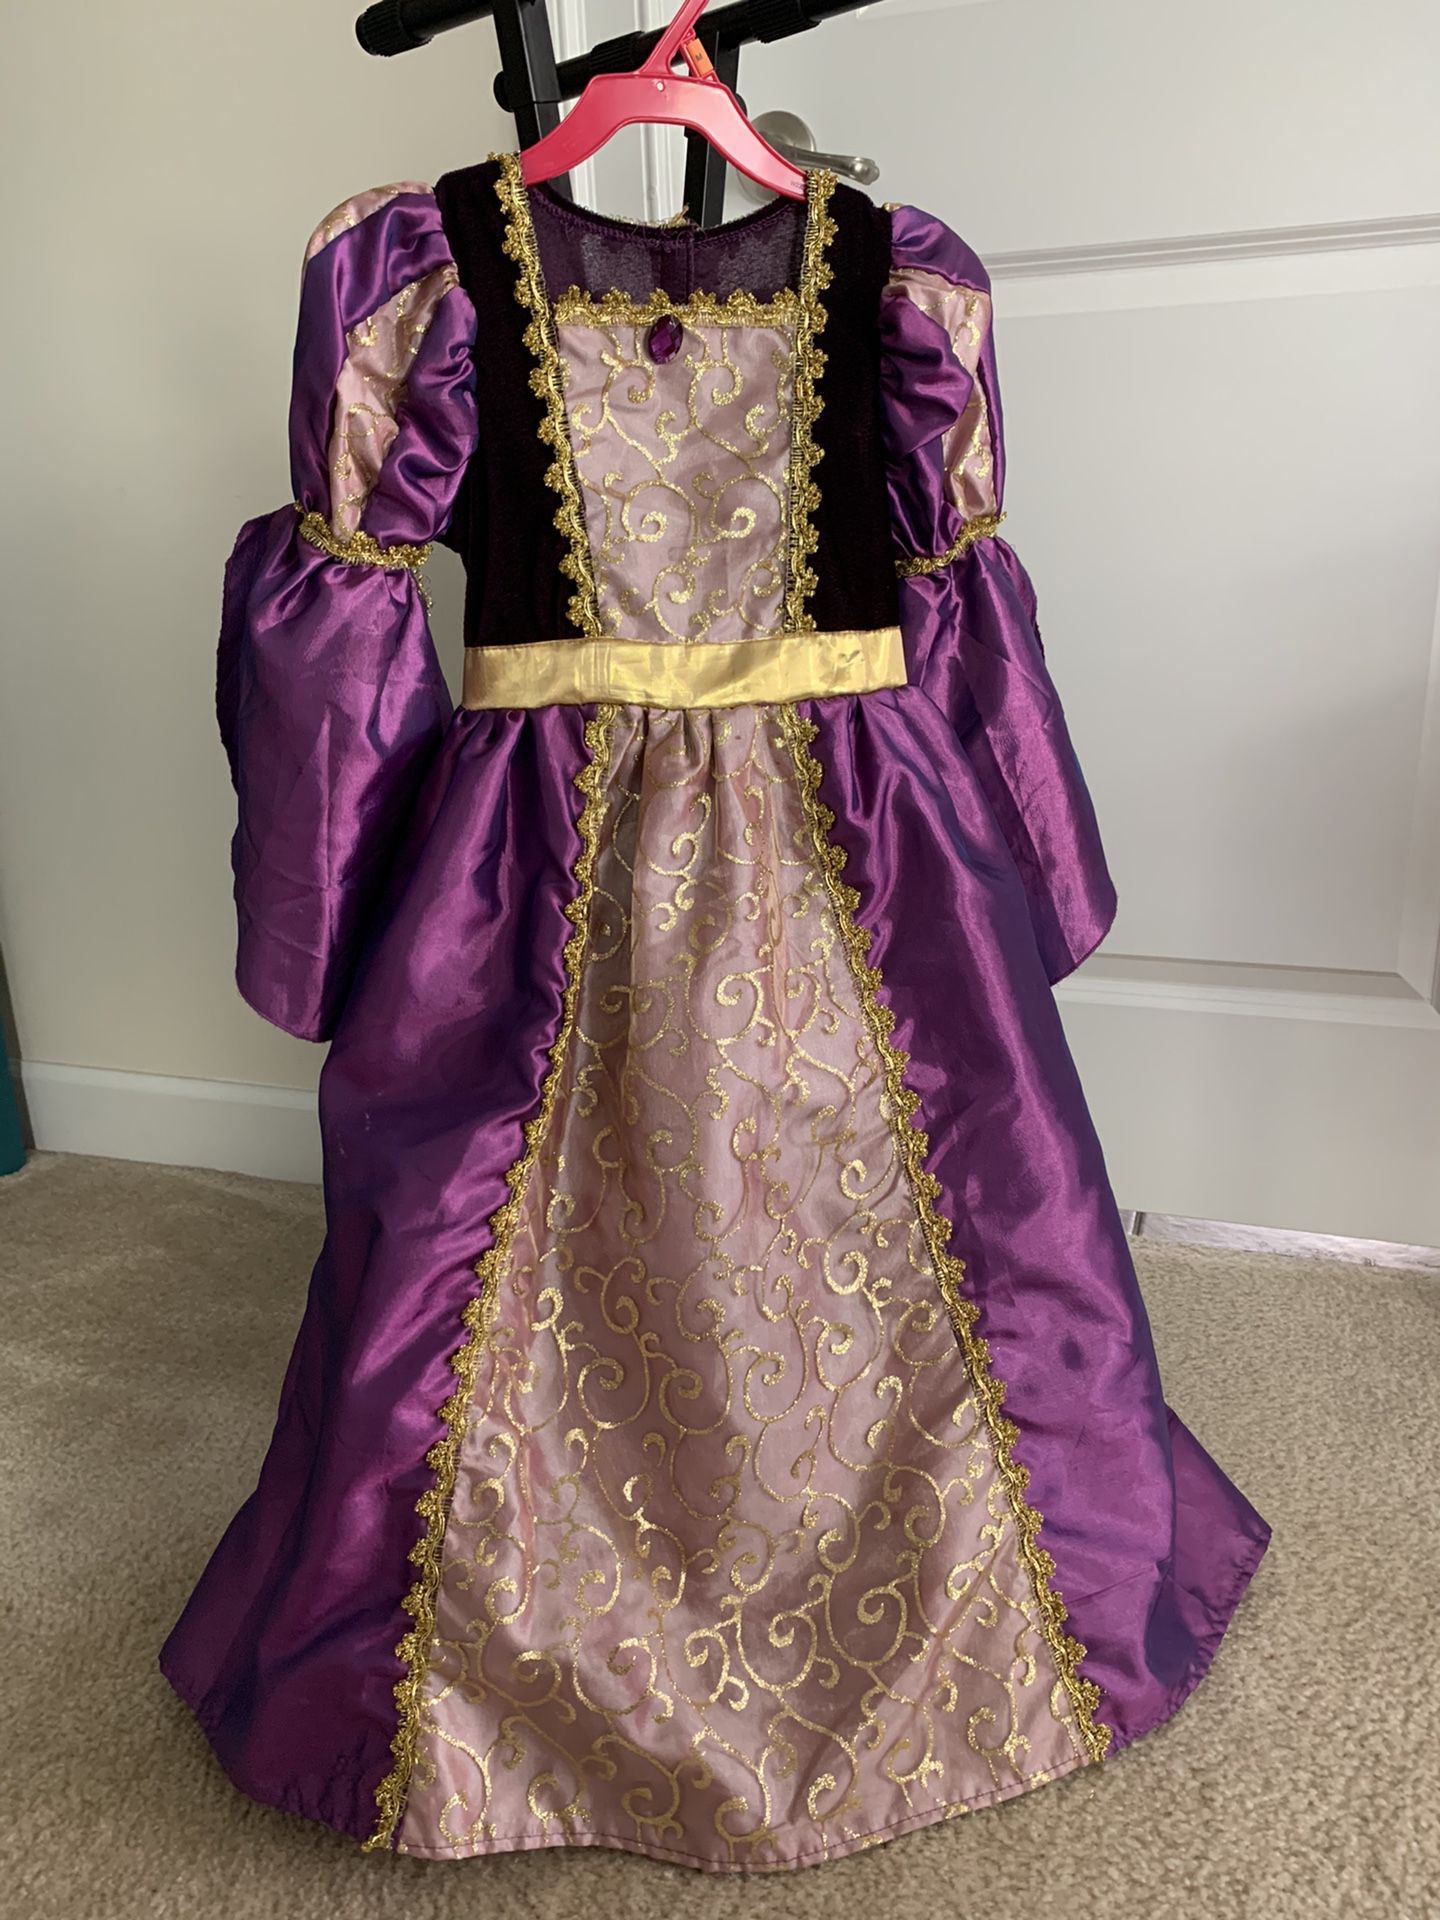 Girl princess outfits/ halloween costumes size 5-7